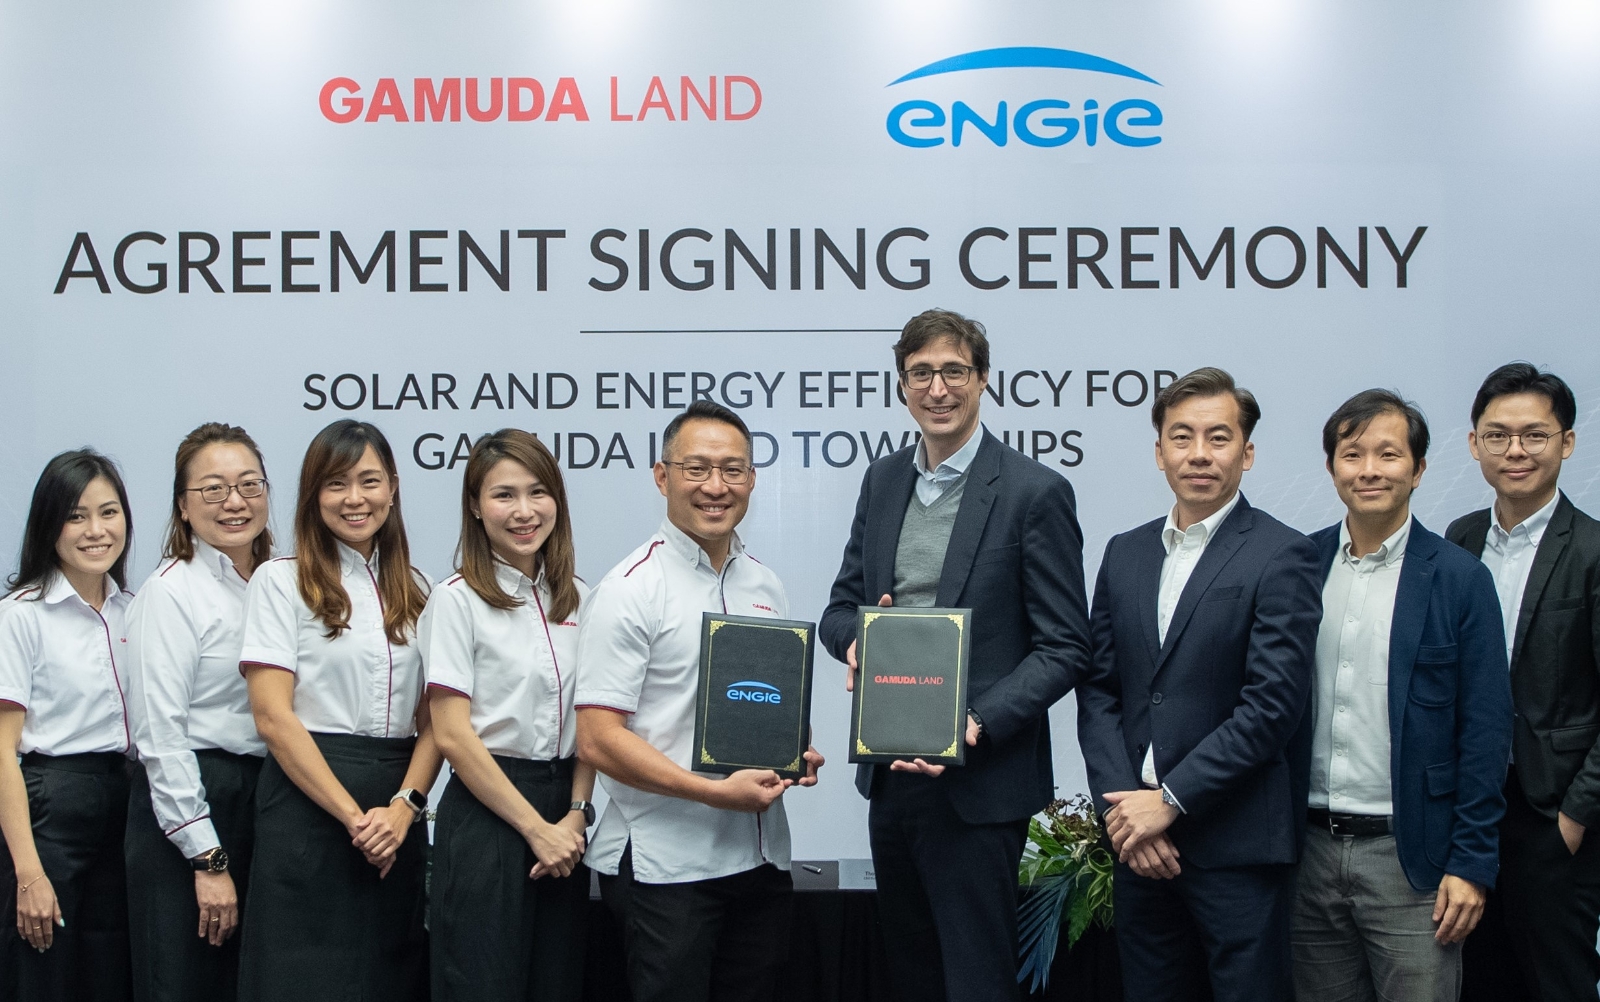 Senior Executives from Gamuda Land and ENGIE South East Asia celebrate the commencement of their partnership at their MoU signing ceremony. From left to right: Gamuda Land - Jess Teng Poh Fern, Chief Operating Officer; Larissa Chan, Executive Director Commercial Real Estate; Sue Way Tan, Executive Director Central Marketing & Sales; Wong Siew Lee, Chief Operating Officer; Chu Wai Lune, CEO; ENGIE - Thomas Baudlot, CEO Energy Solutions APAC and Country Head Southeast Asia, ENGIE South East Asia; Wong Yin Kee, Managing Director, ENGIE Services Malaysia; Kevin Hor, Head of Business Development, Energy Solutions, ENGIE Services Malaysia; Jong Hui, Business Development Manager, Solar C&I, ENGIE Services Malaysia. 